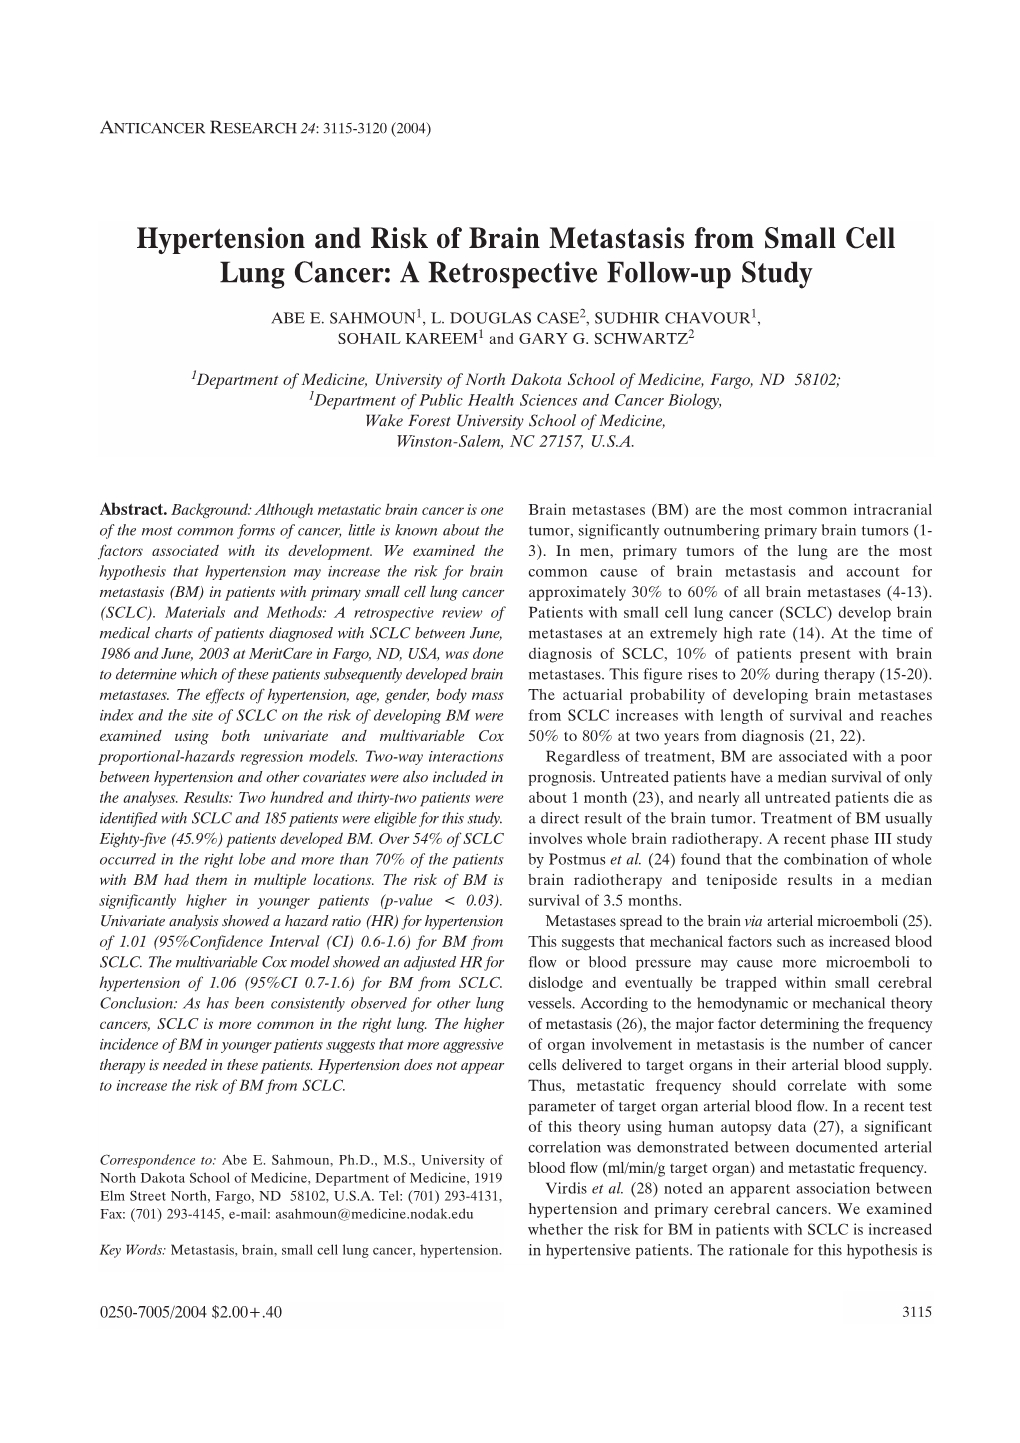 Hypertension and Risk of Brain Metastasis from Small Cell Lung Cancer: a Retrospective Follow-Up Study